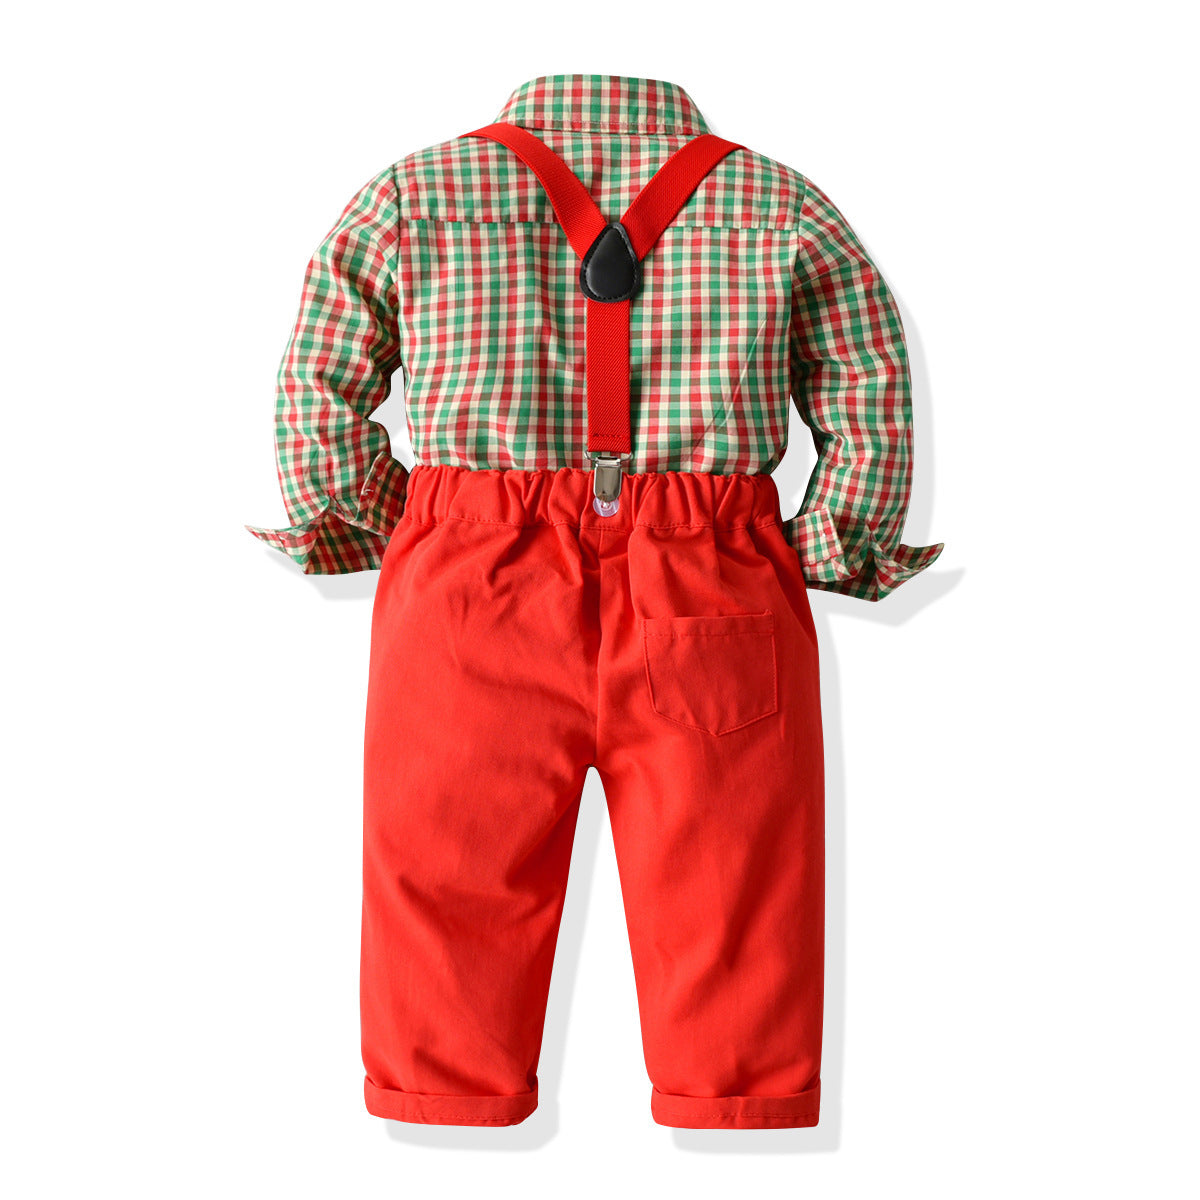 Boys' Plaid Shirt Bow Tie Overalls Party Dress